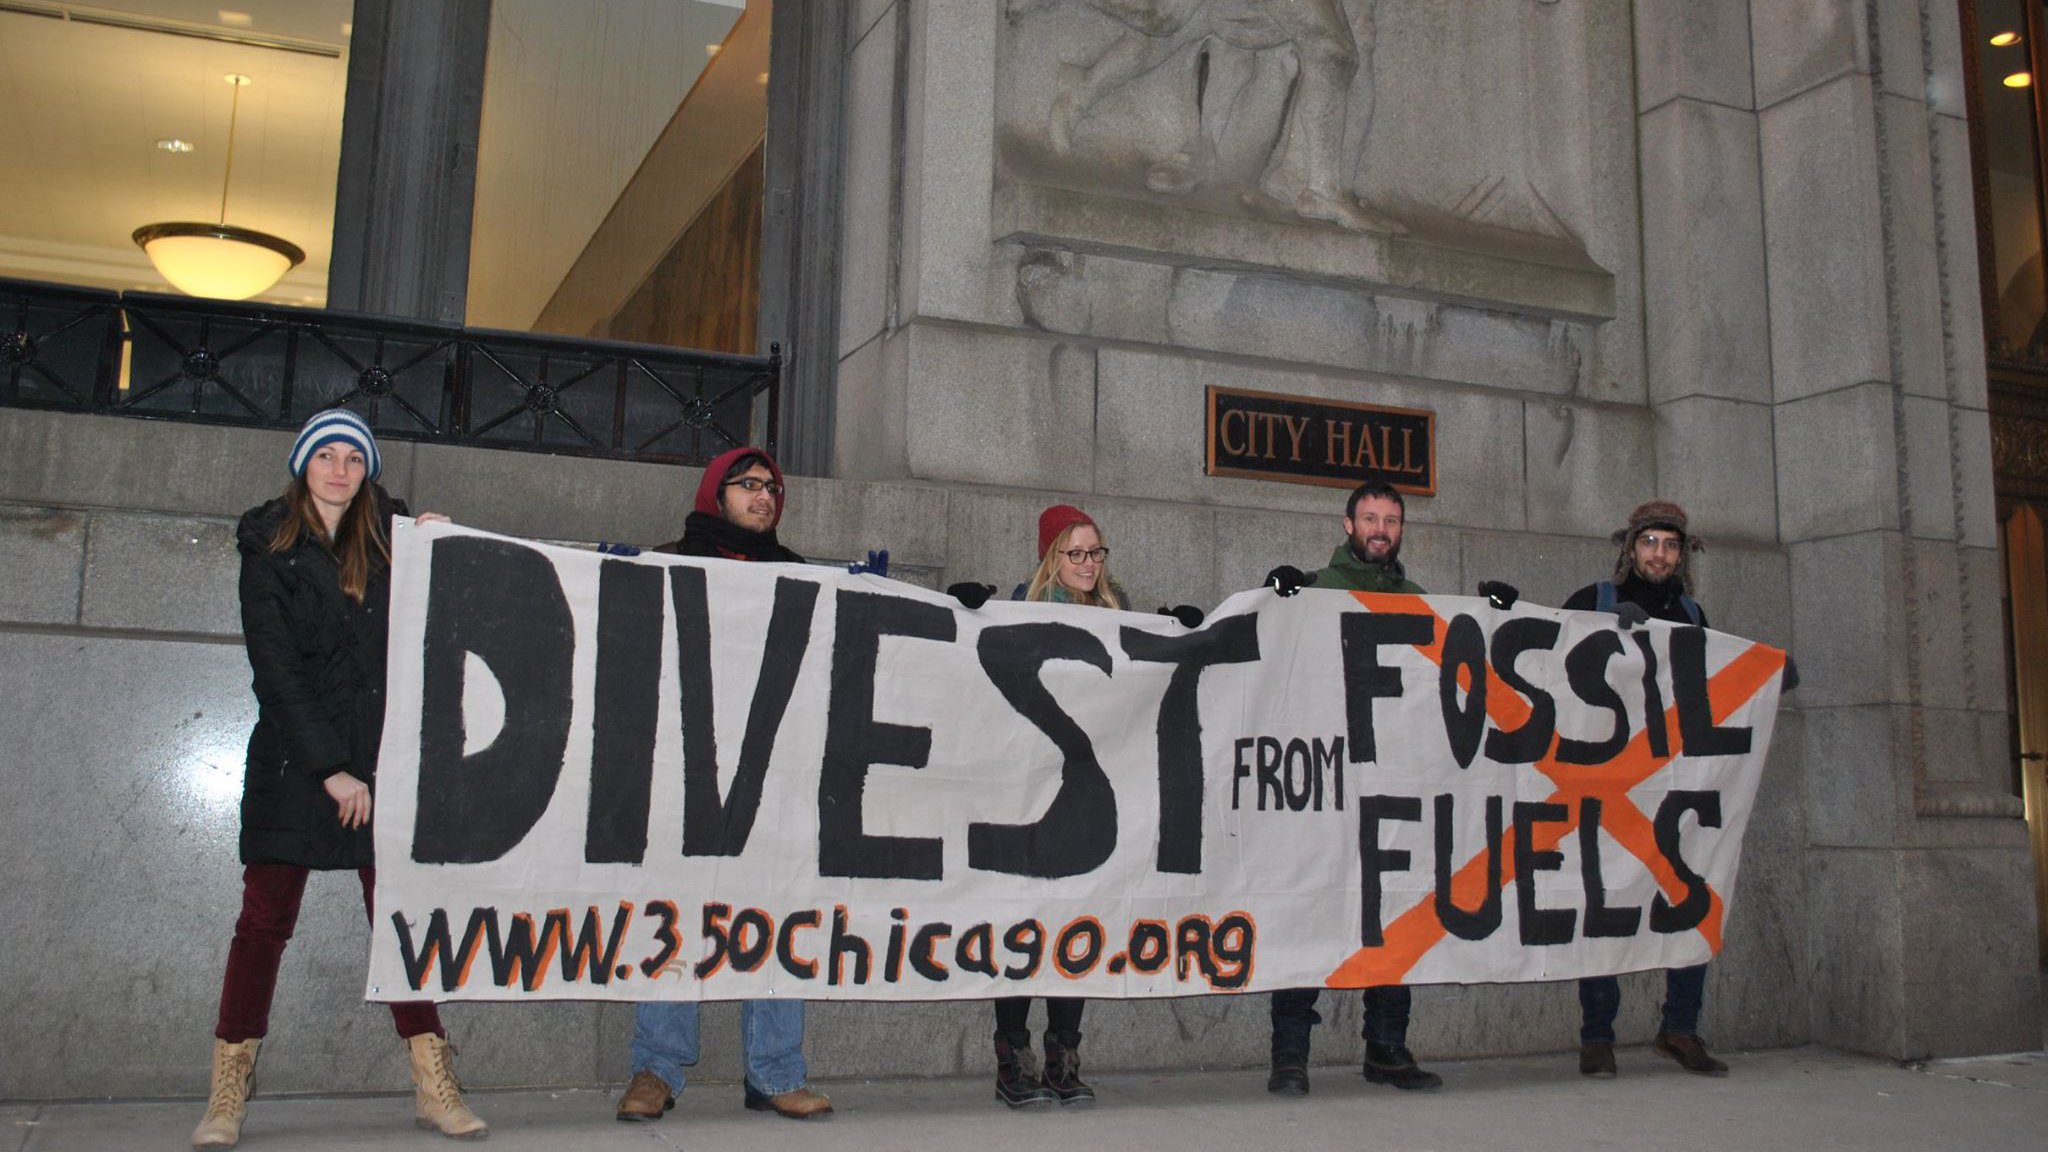 Activists from 350 Chicago protest at City Hall on Global Divestment Day, Feb. 14, 2015. (Courtesy of Melissa Brice)